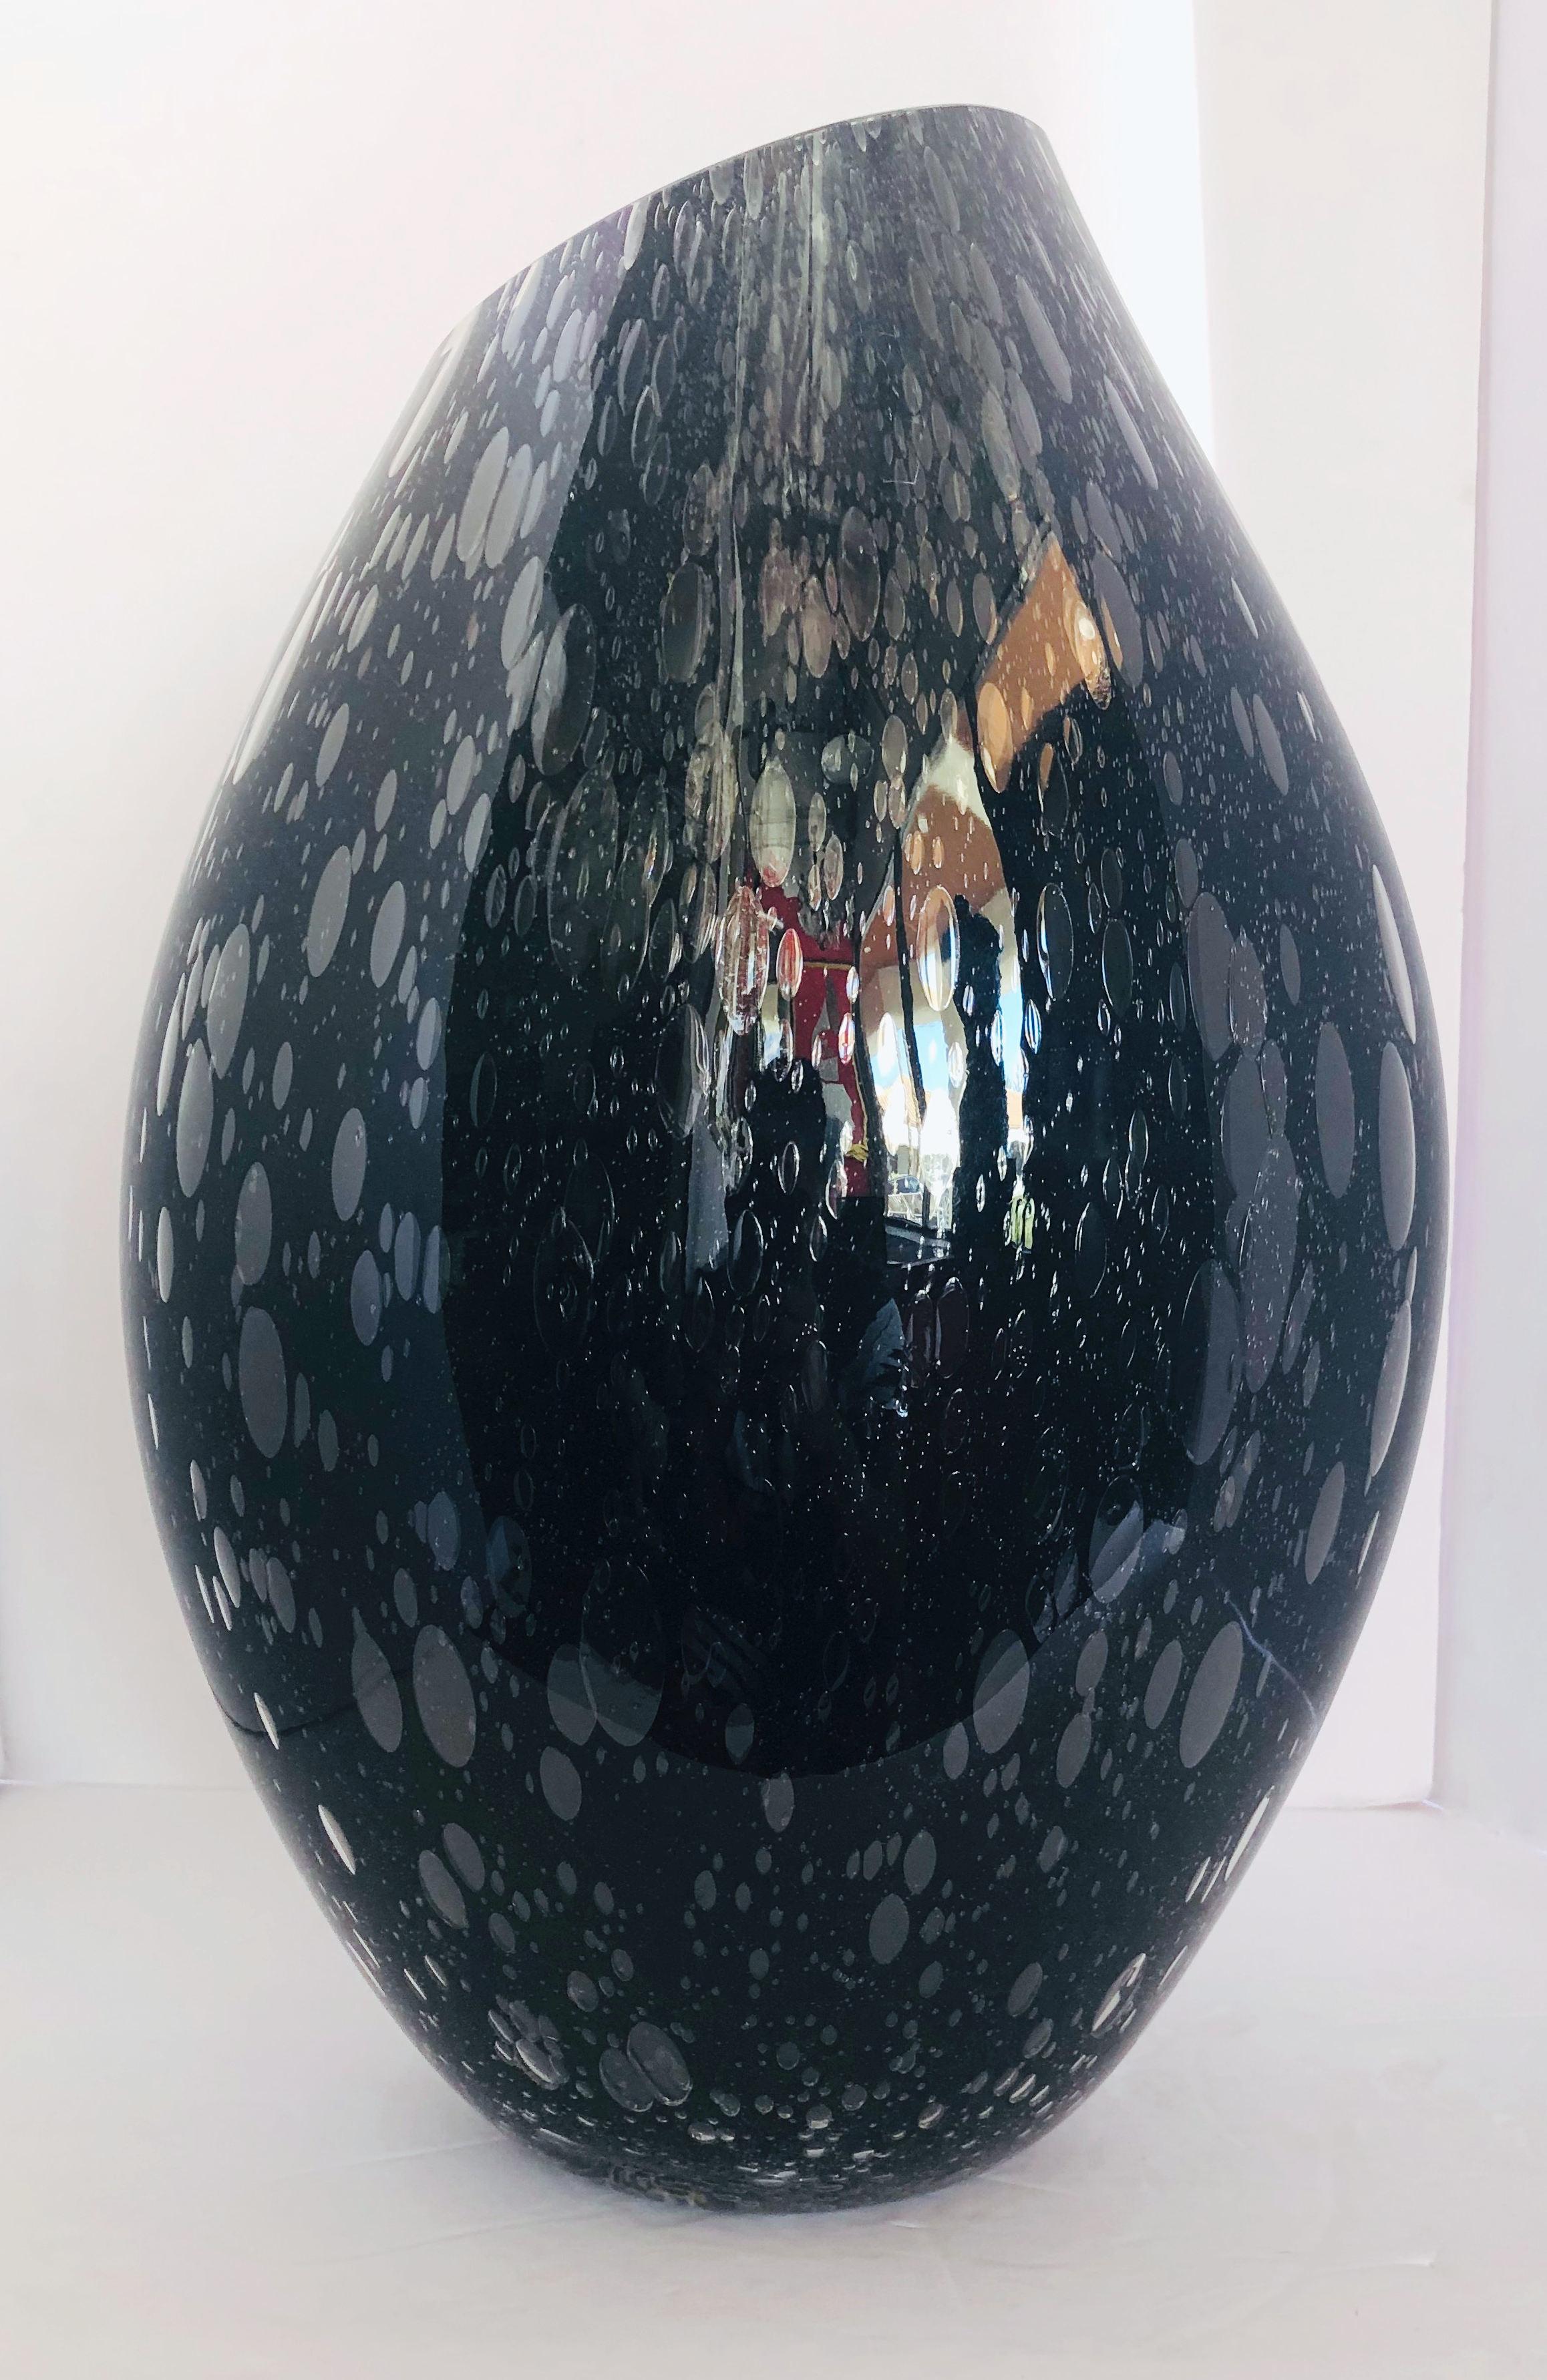 Italian vase or sculpture in thick black Murano glass blown with bubbles within the glass in Pulegoso technique by Alberto Dona for Fabio Ltd
Signature engraved on the base / Made in Italy
Height: 18 inches / Width: 12 inches / Depth: 8.5 inches 
1